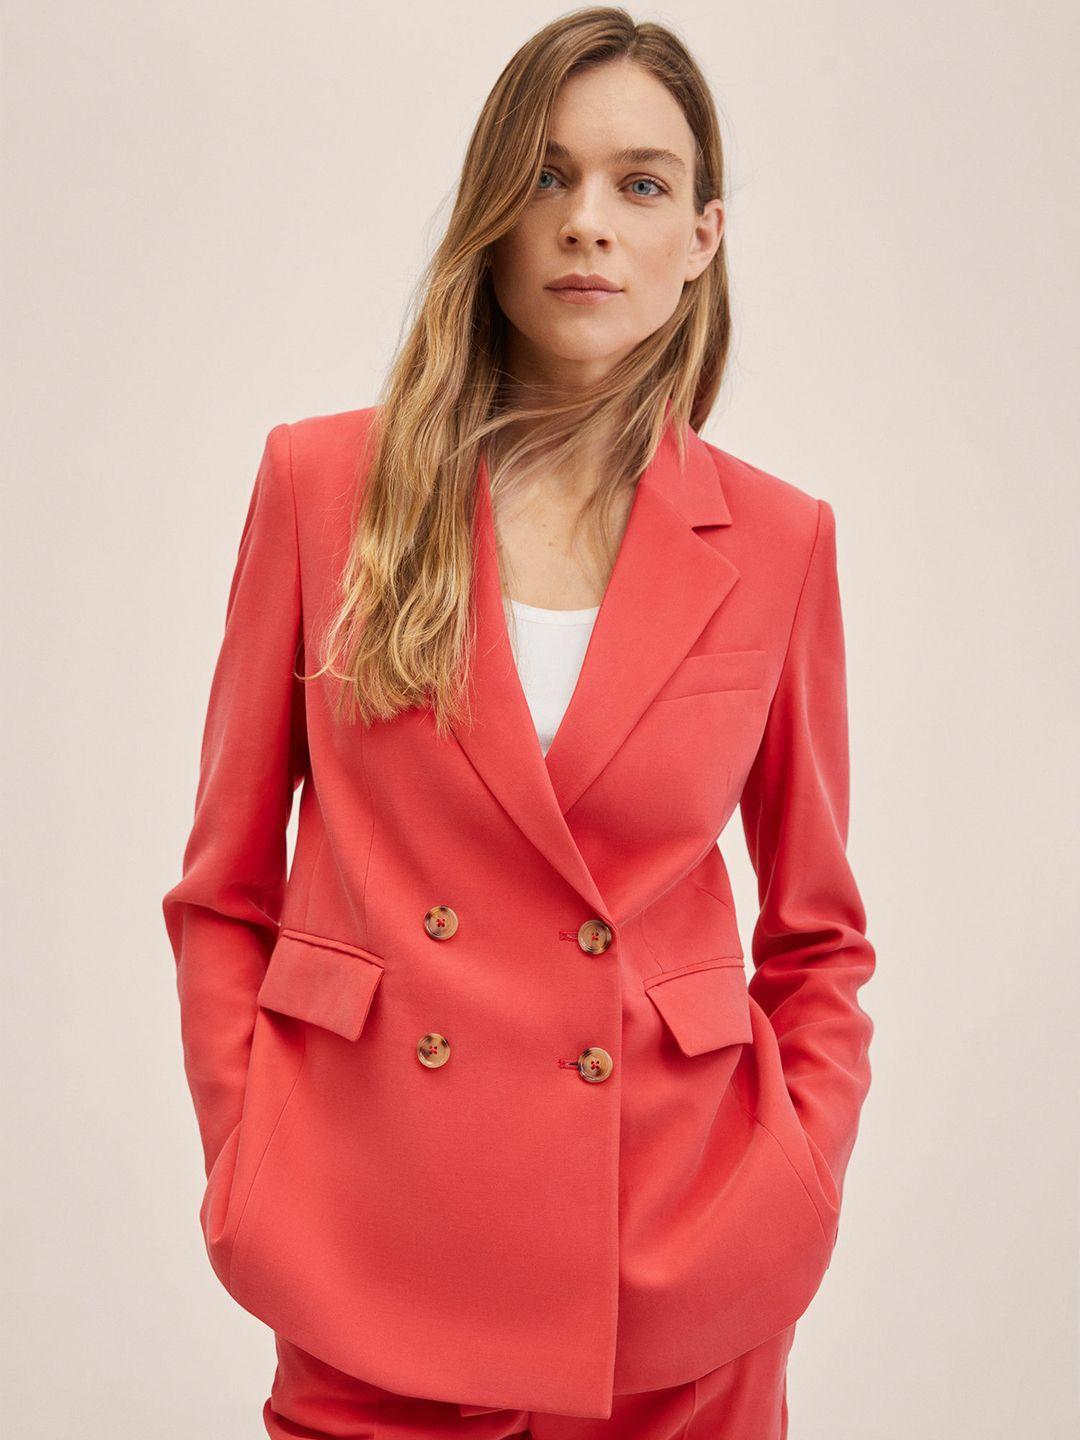 mango-women-coral-red-solid-double-breasted-blazer